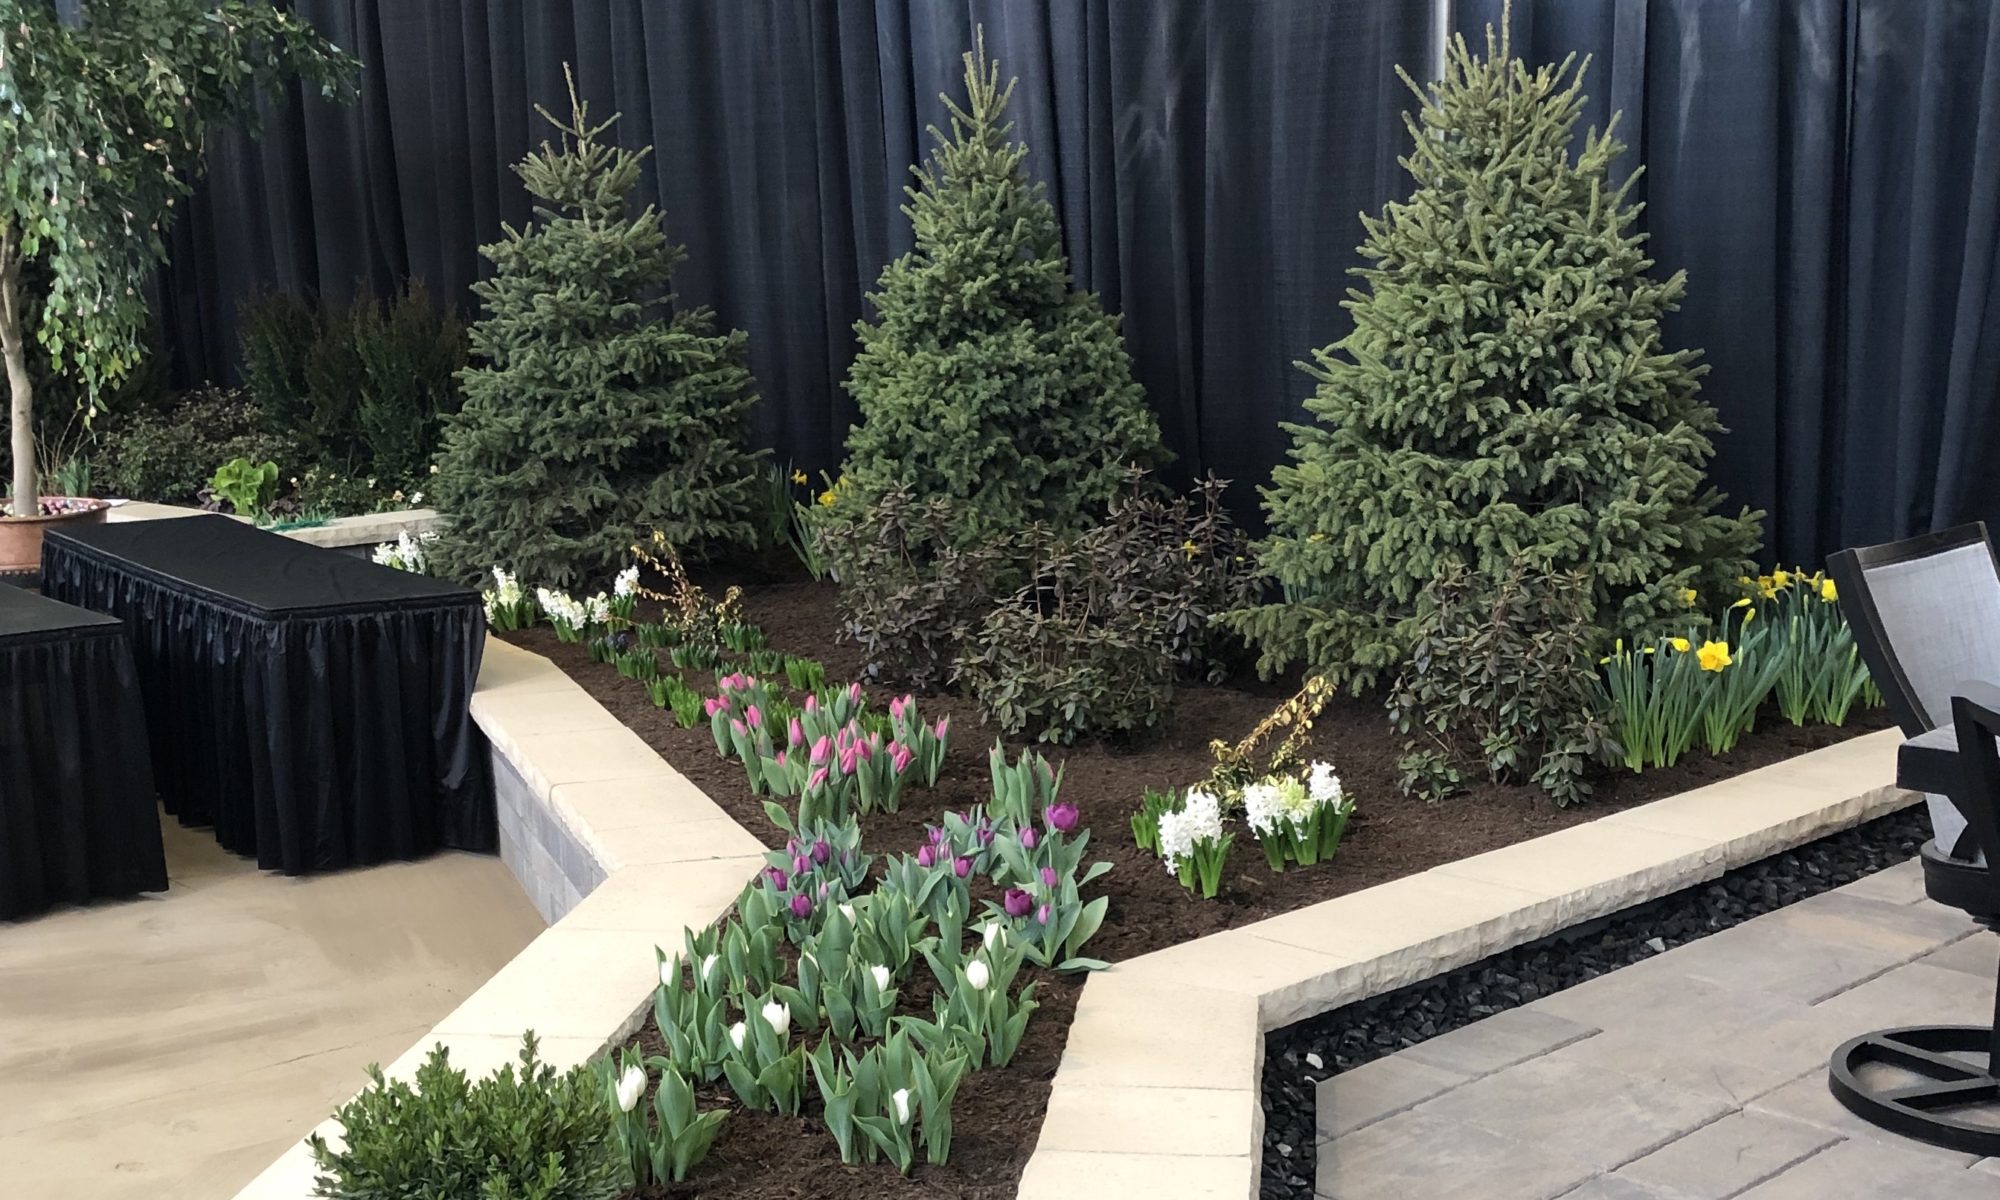 flower and patio show 2019 precision outdoors landscaping pergola structureforepit flower box paver patio